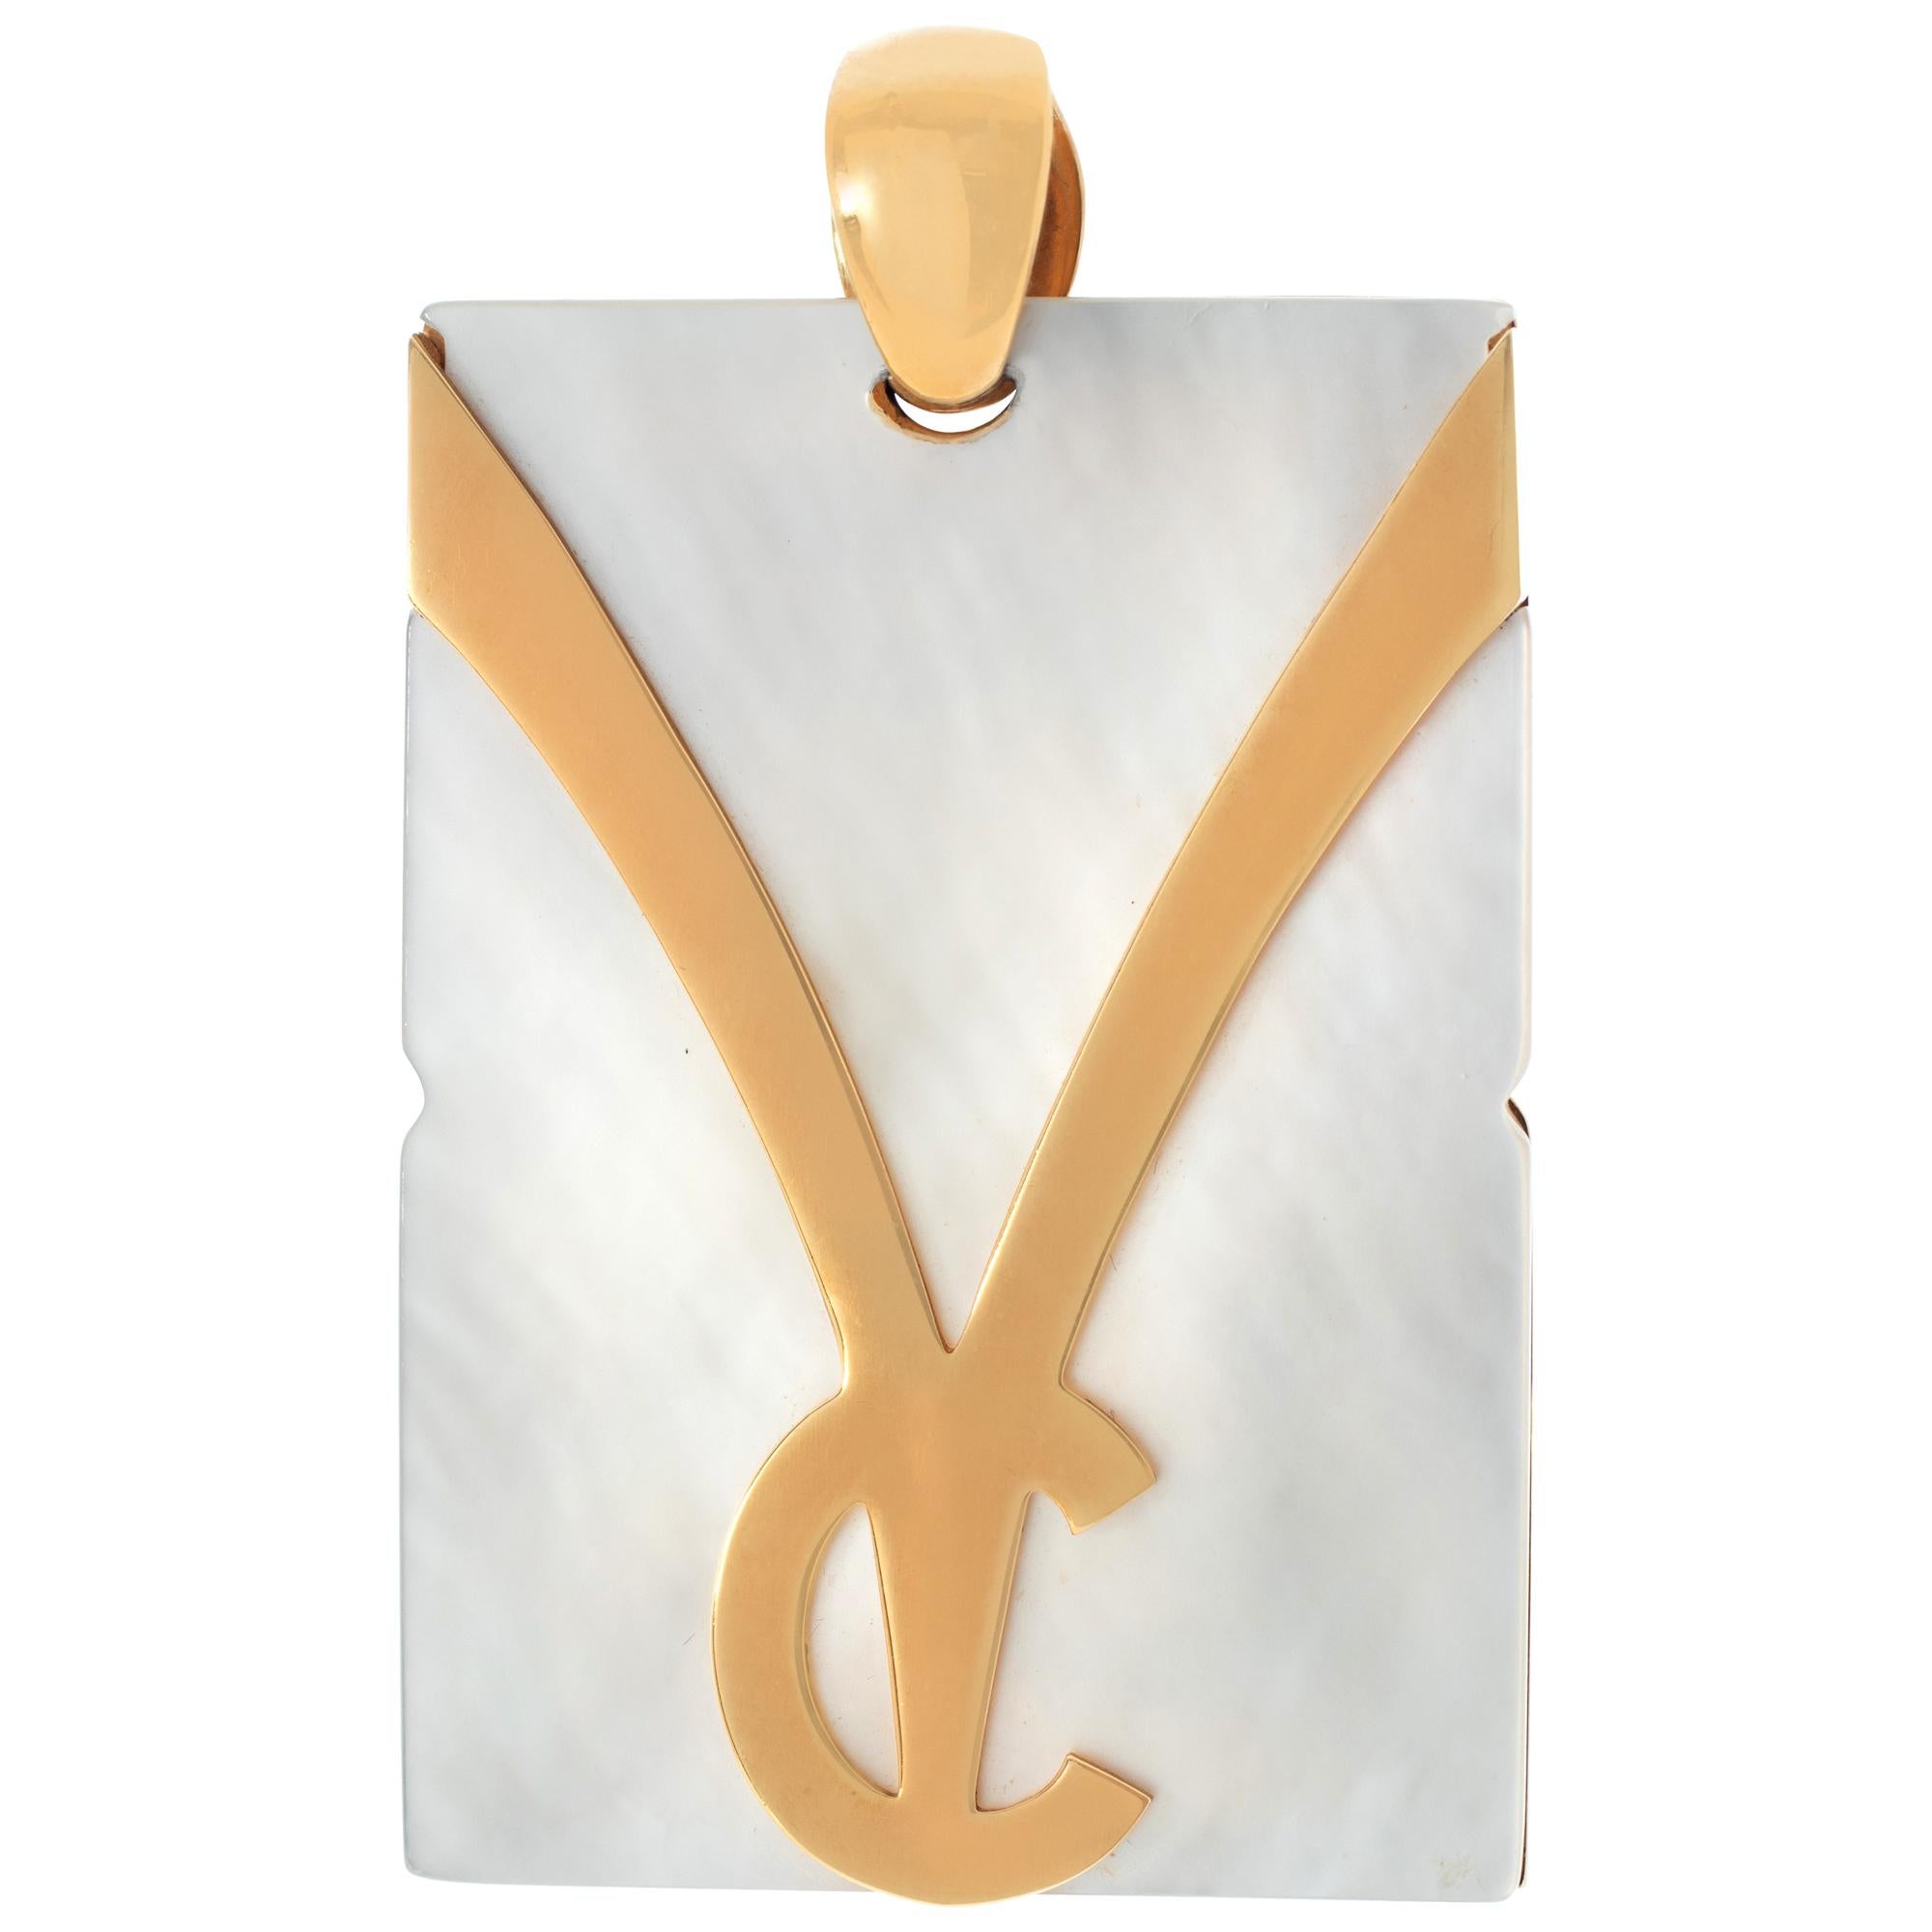 Victoria Casal Paris, mother of pearl and diamonds pendant in 18k yellow gold. Round brilliant cut diamonds approx. total weight: 1.00 carat, estimate G- H color, VS clarity. Comes with original box. Size 1.38  x 1.95 inches.
